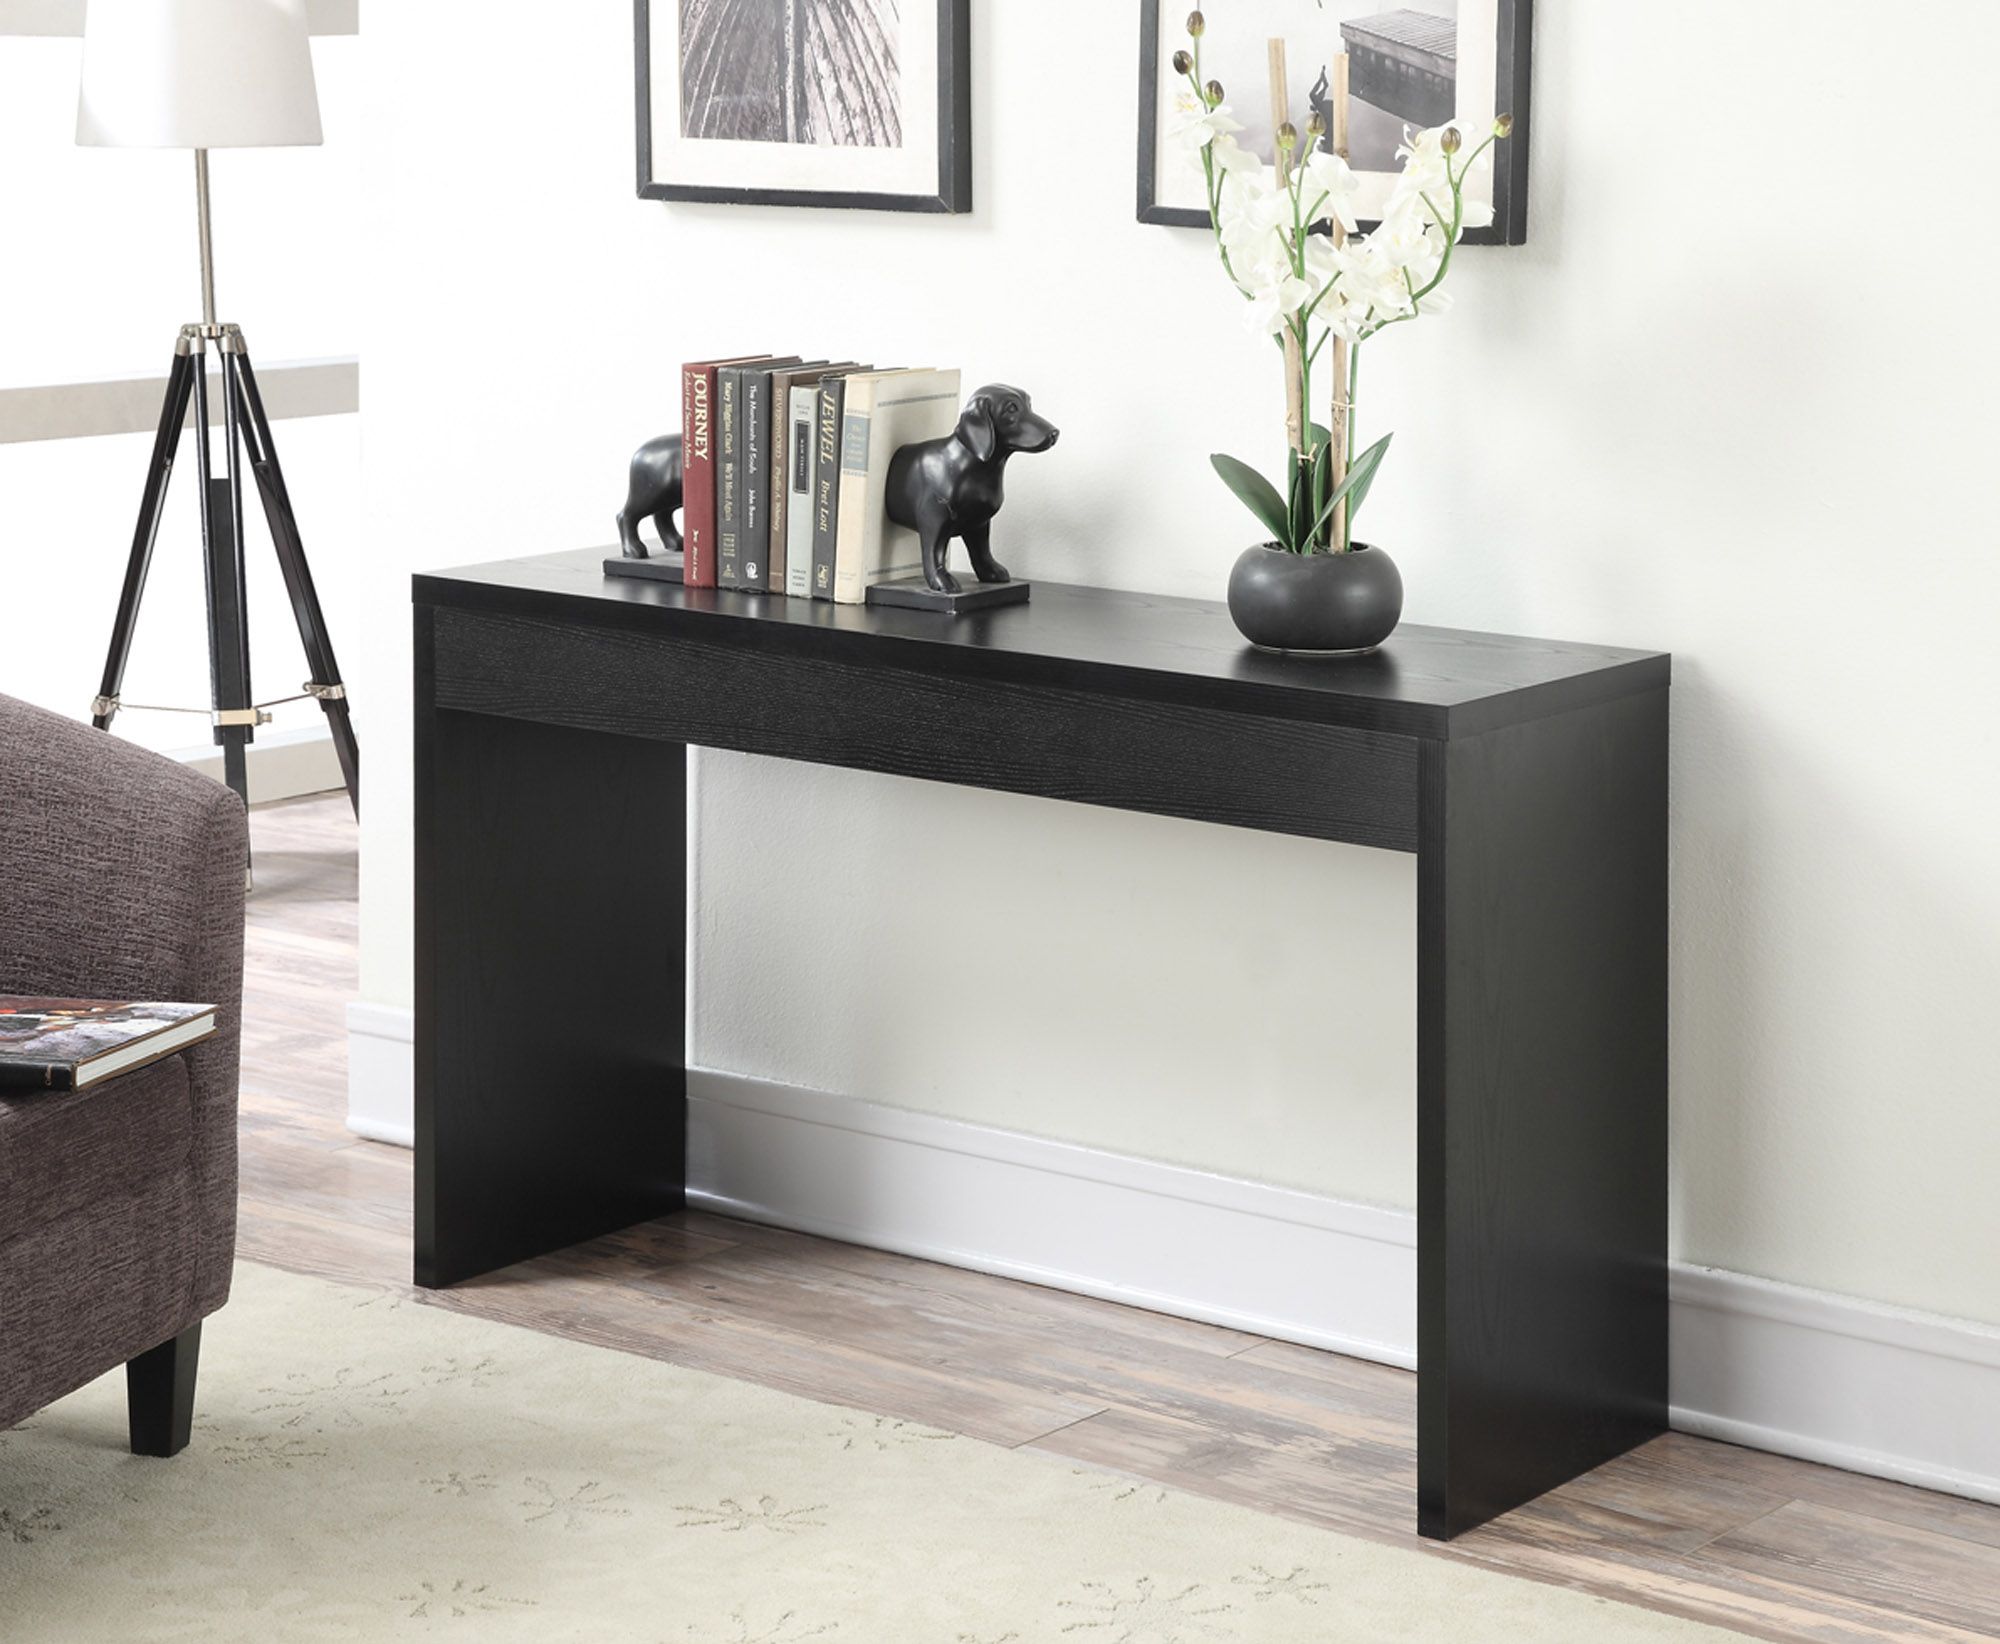 Convenience Concepts Northfield Hall Console Table, Multiple Colors | Walmart (US)